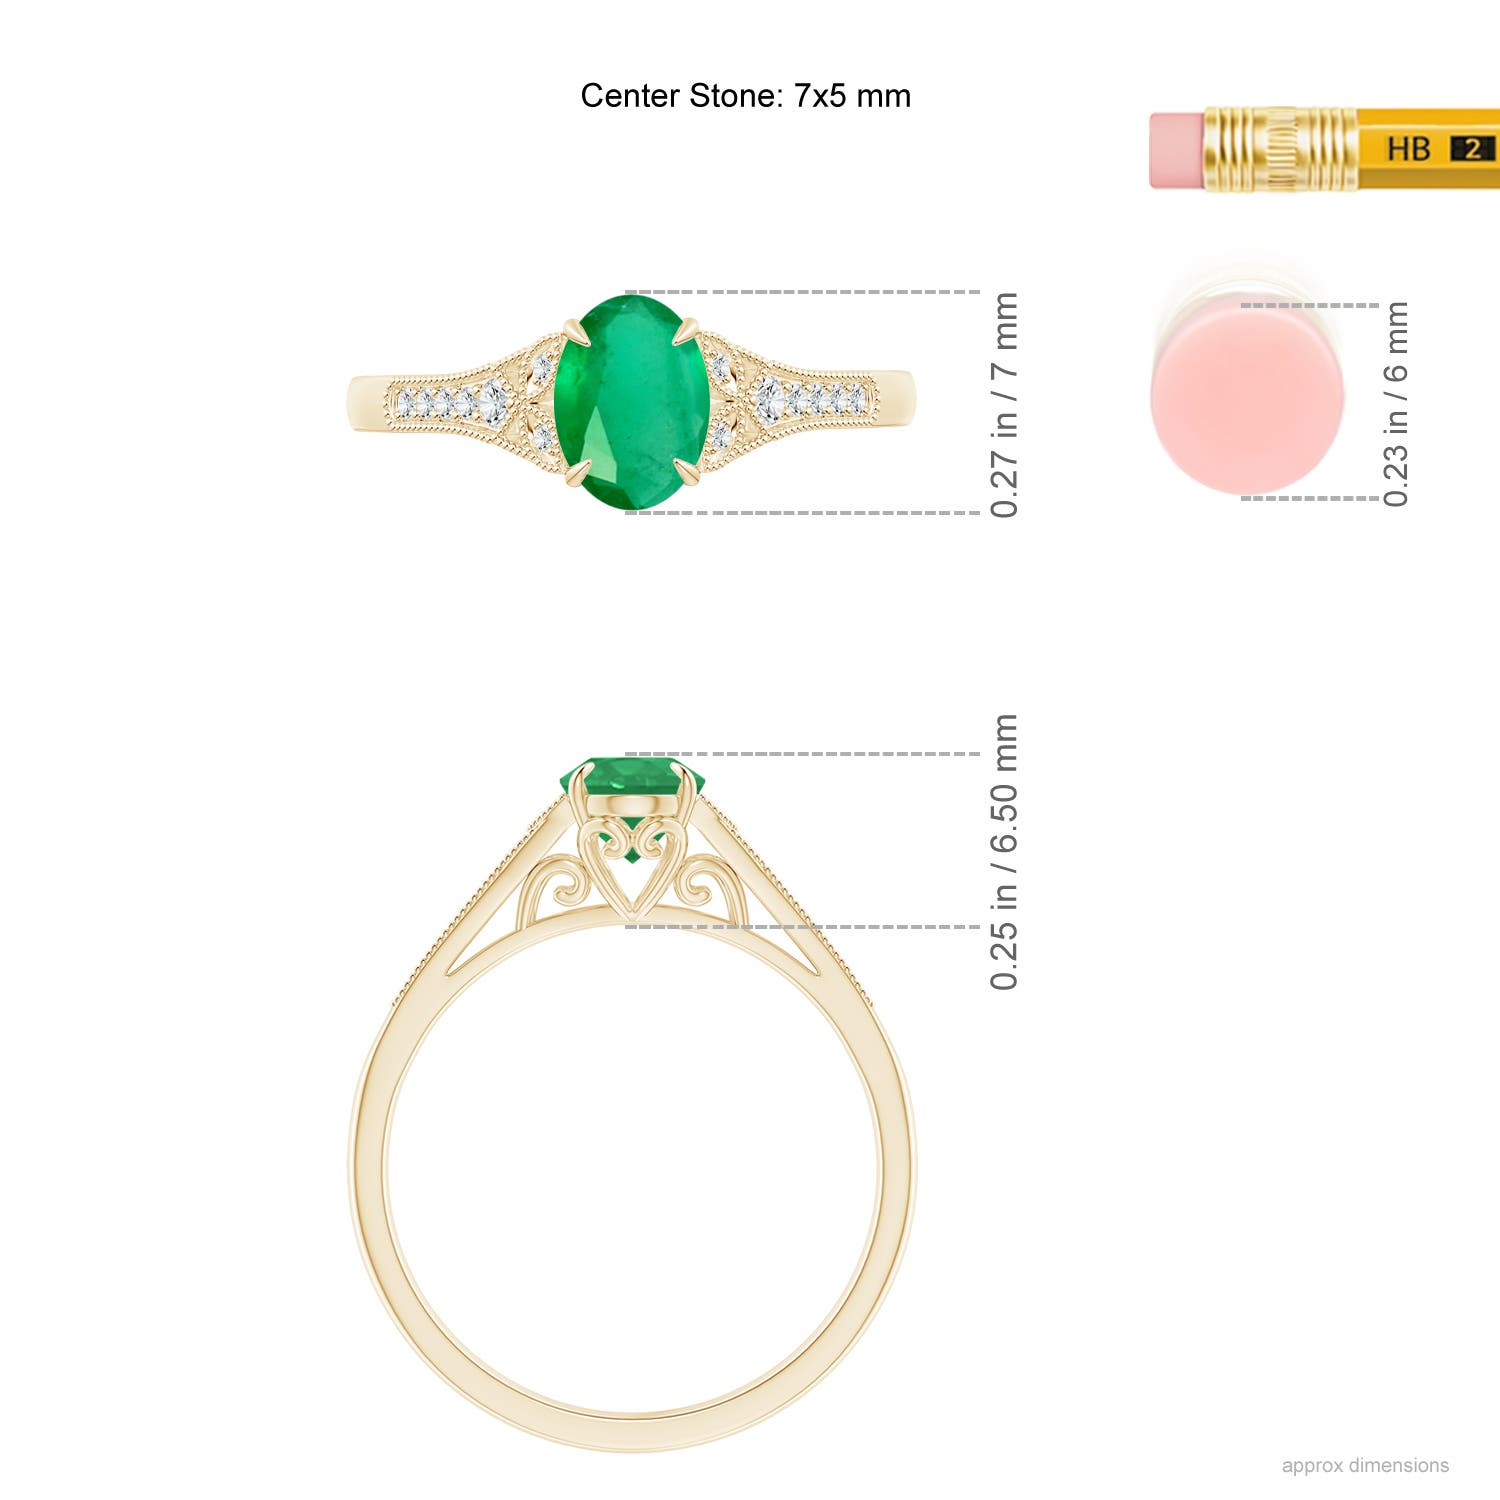 A - Emerald / 0.77 CT / 14 KT Yellow Gold